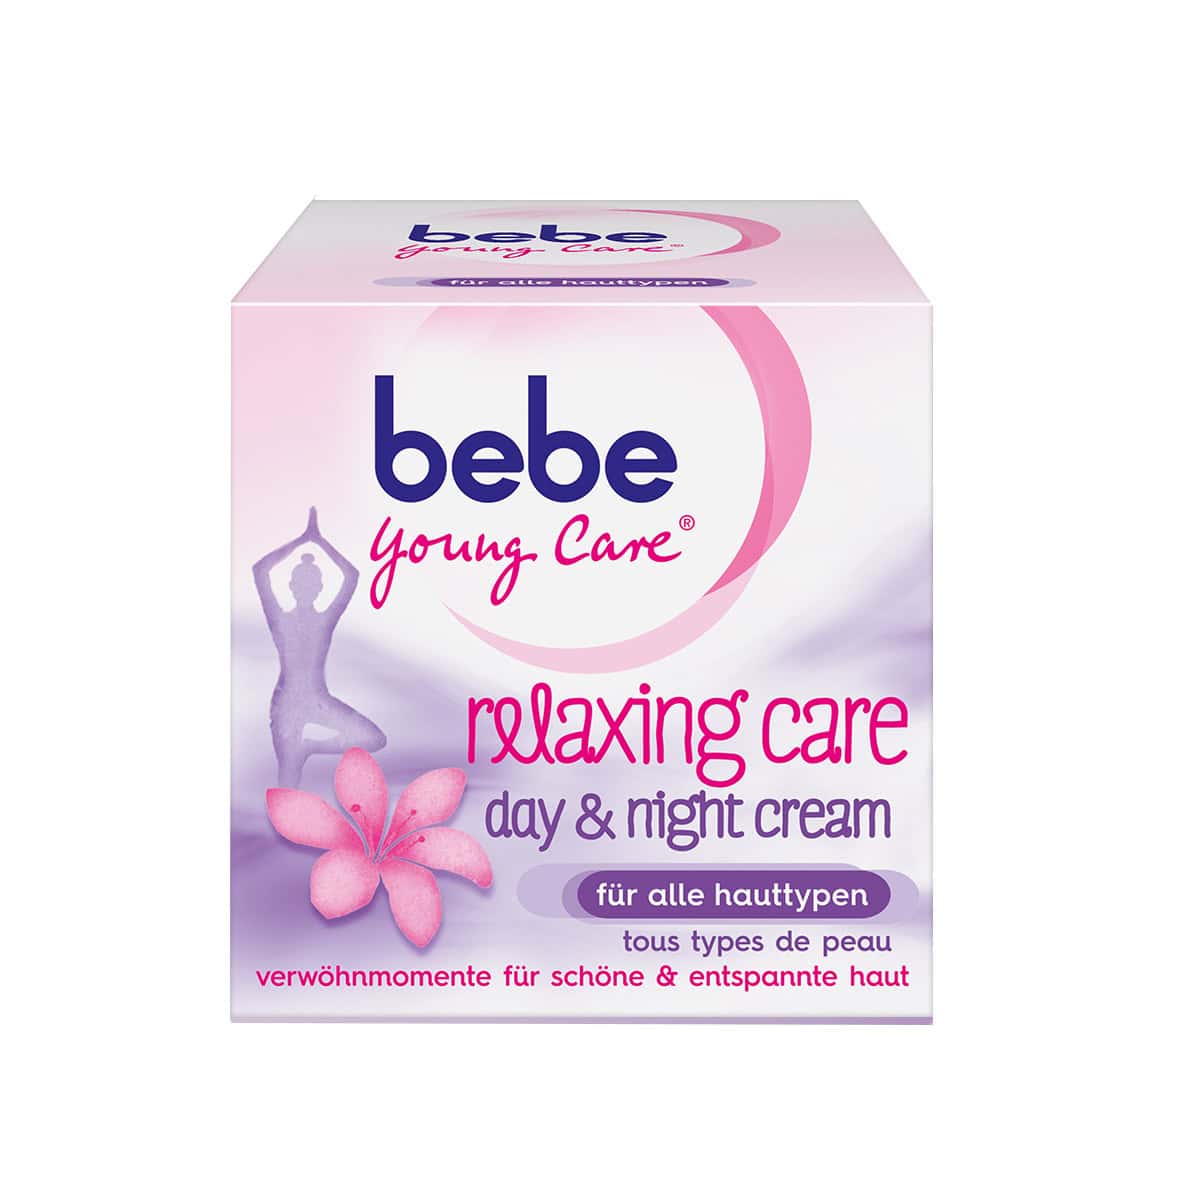 Bebe Young Care Relaxing Care Day Night Cream 50 Ml 1 7 Fl Oz Buy German